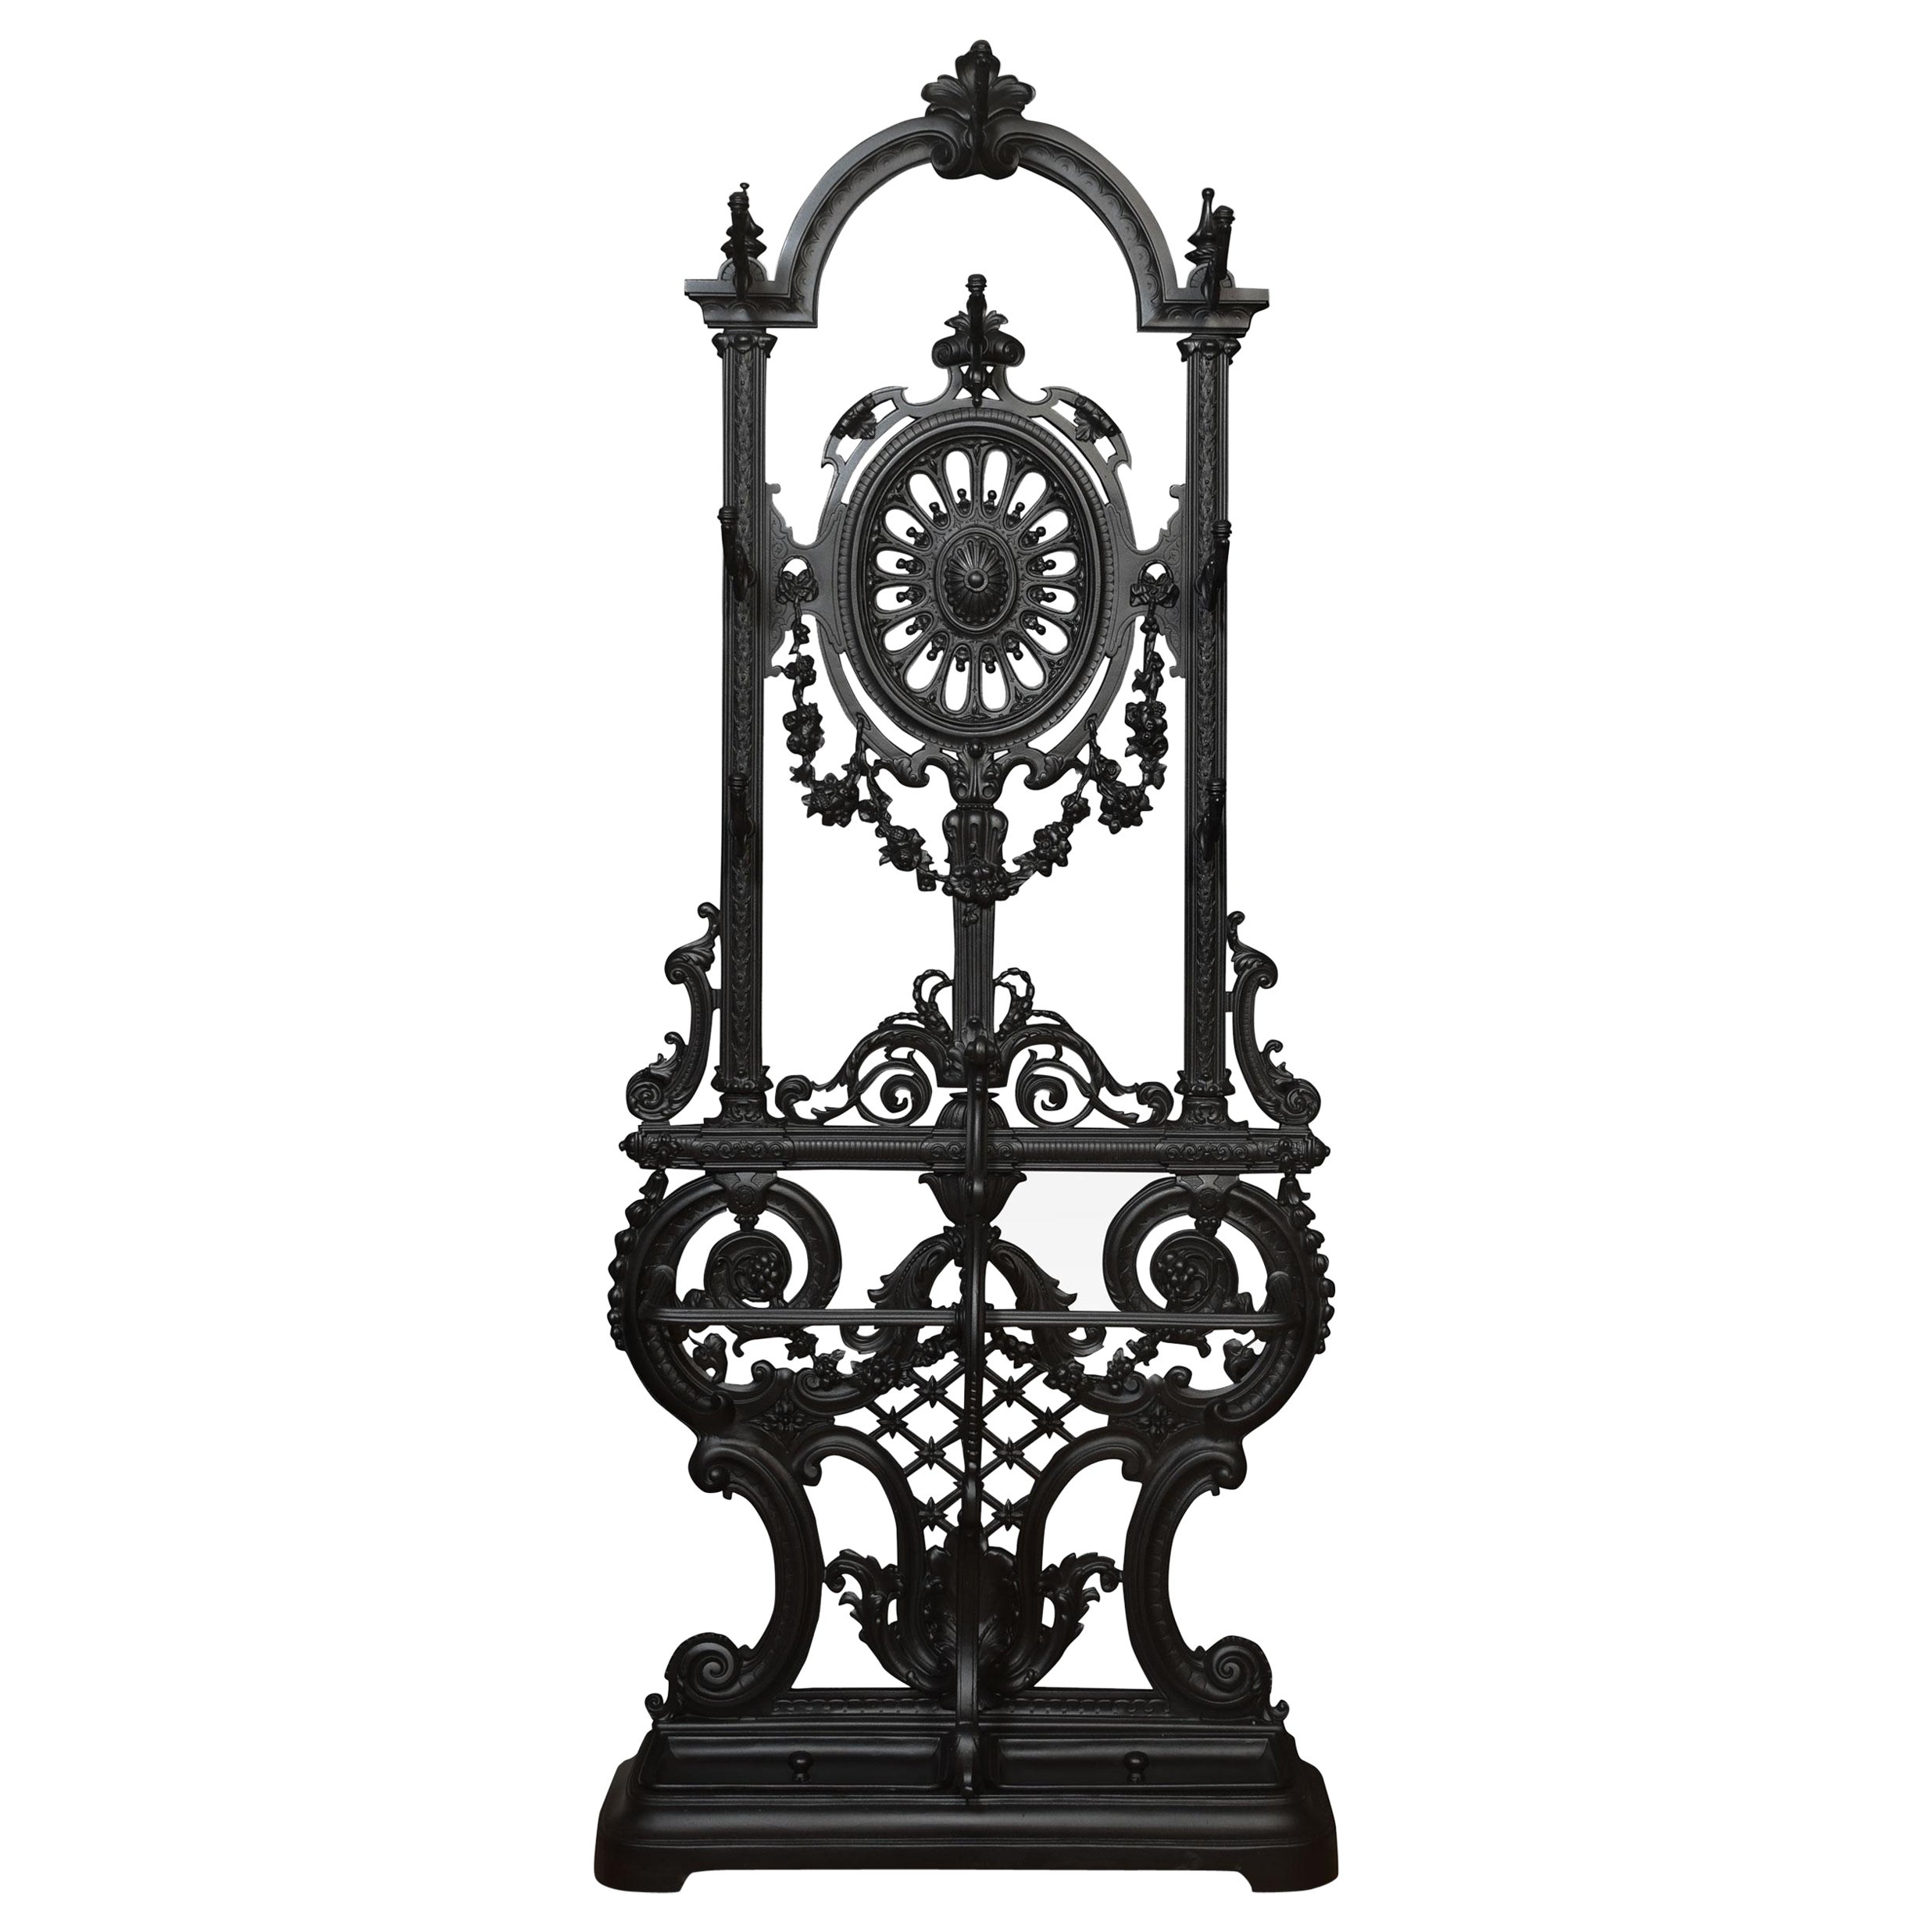 Coalbrookdale style cast iron hall stand